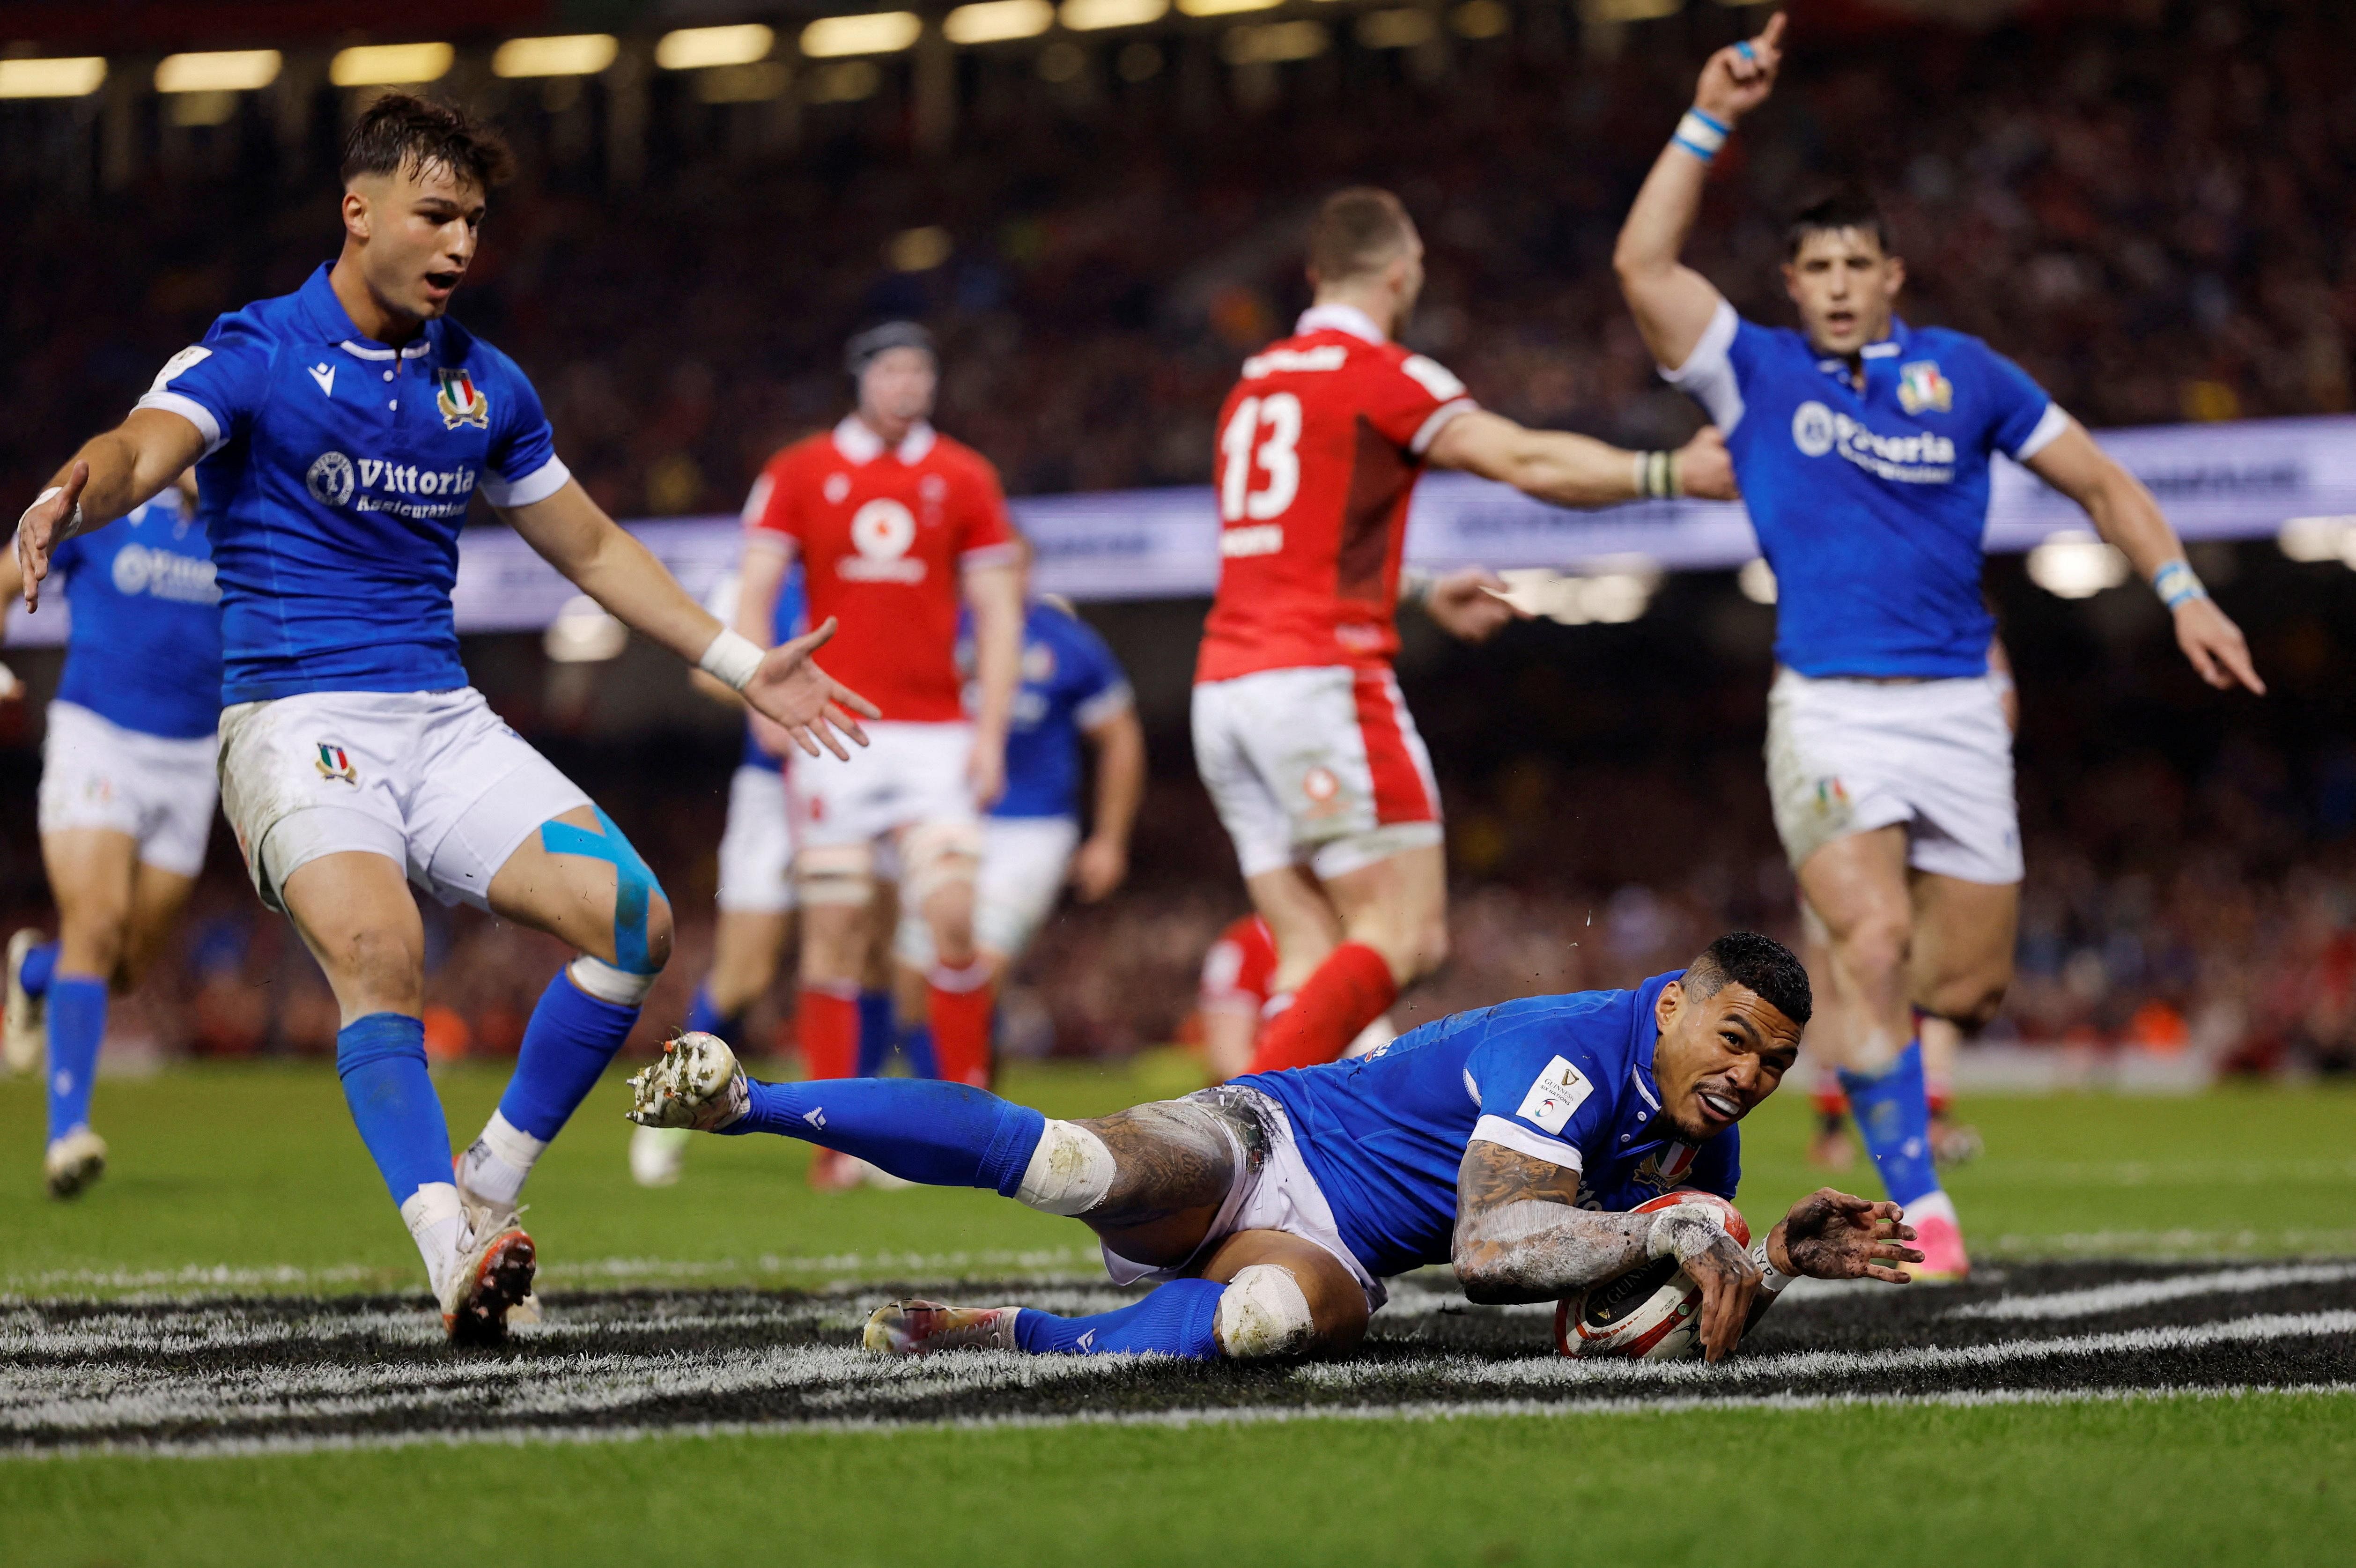 Italy condemn sloppy Wales to Six Nations wooden spoon